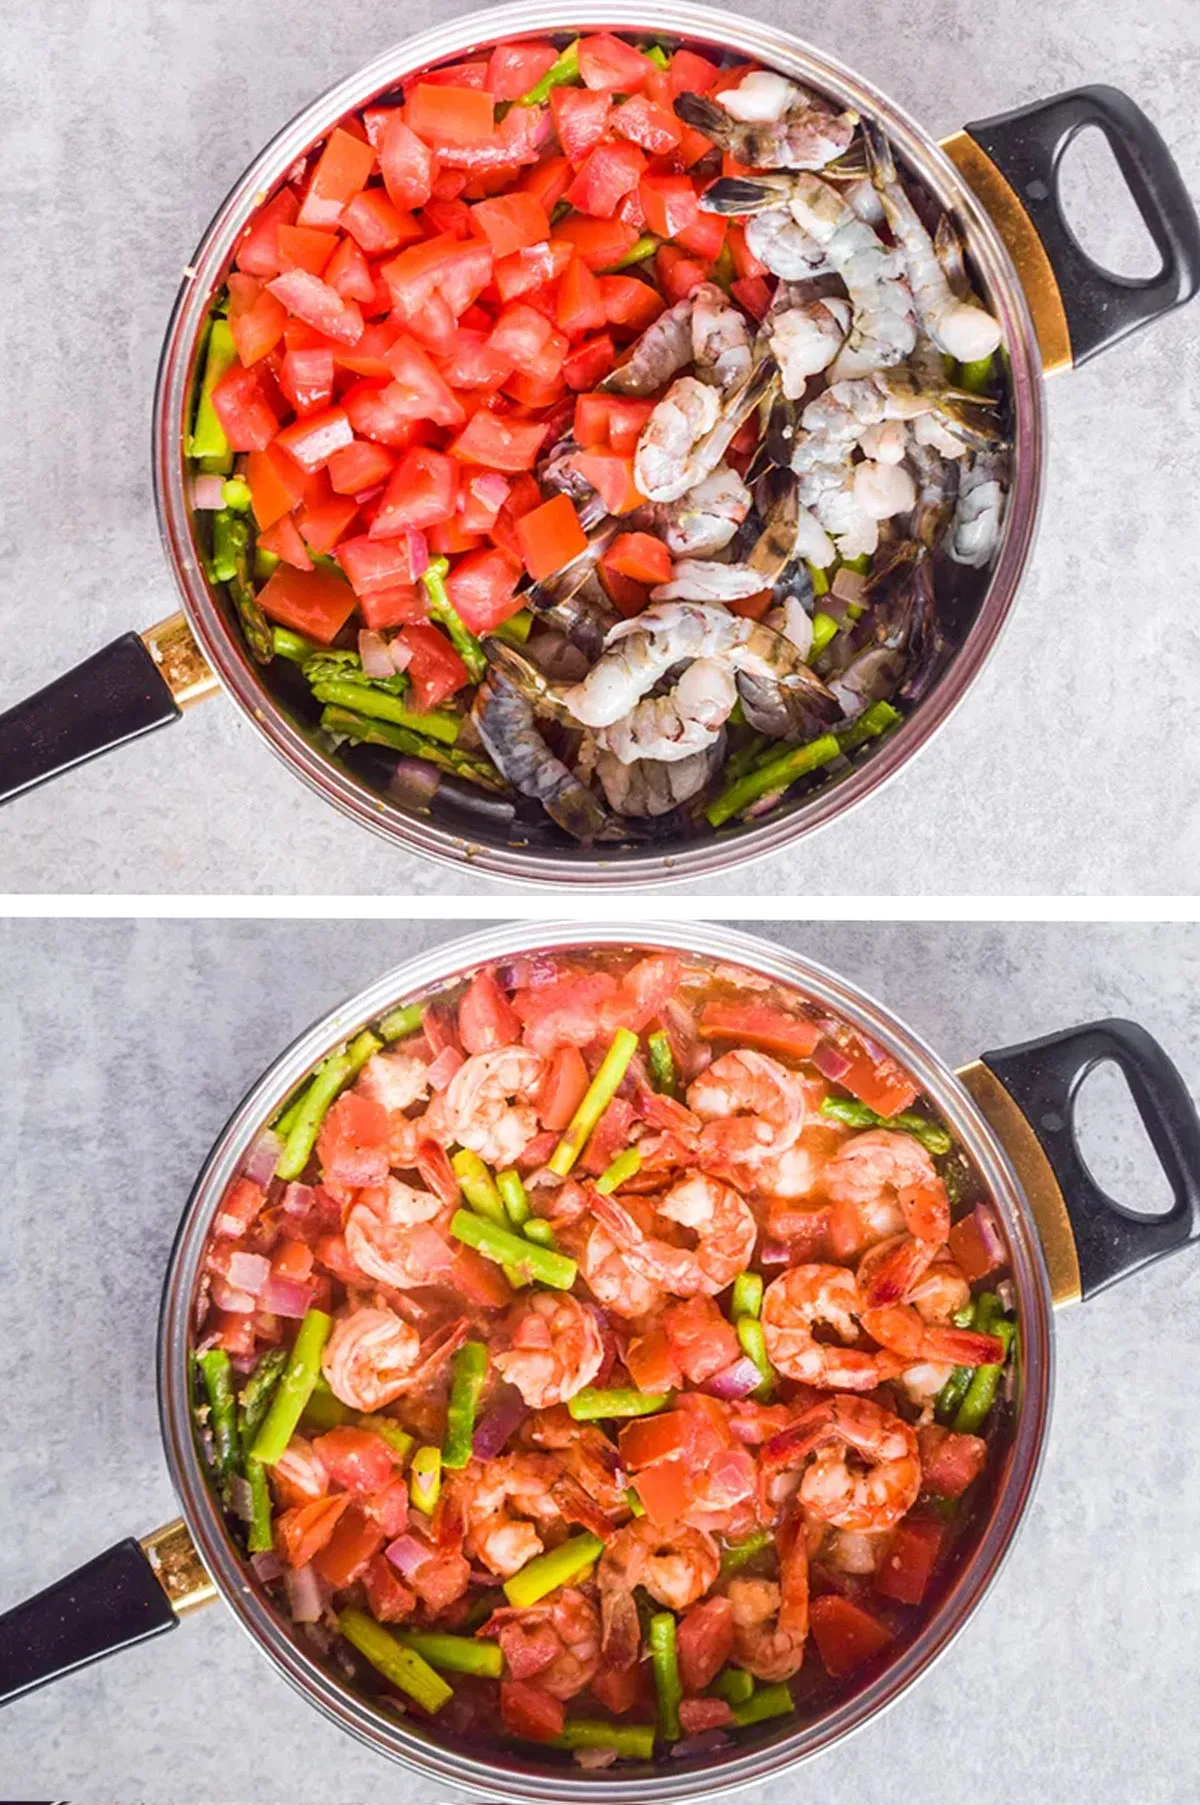 Two images of a frying pan with chopped tomatoes and raw shrimp over asparagus mixture. Then second image with cooked shrimp in mixture.